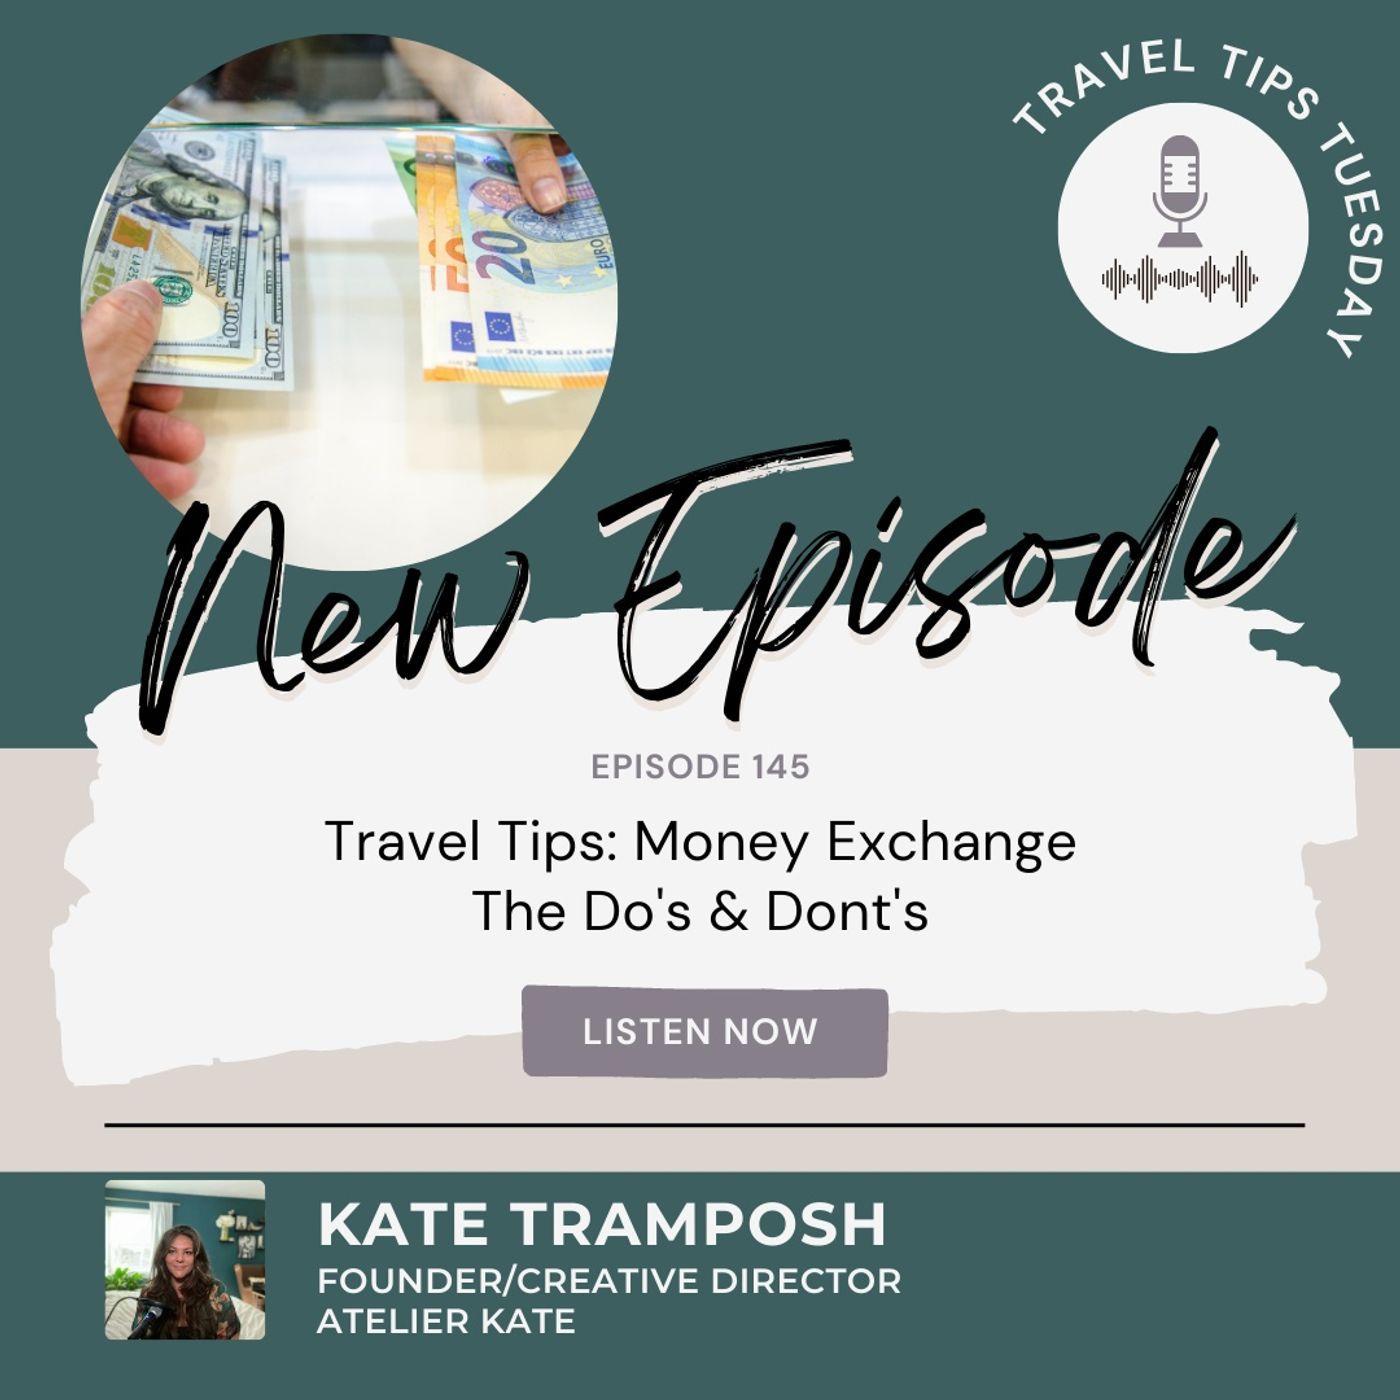 Travel Tips: Money Exchange: The Do's & Don'ts